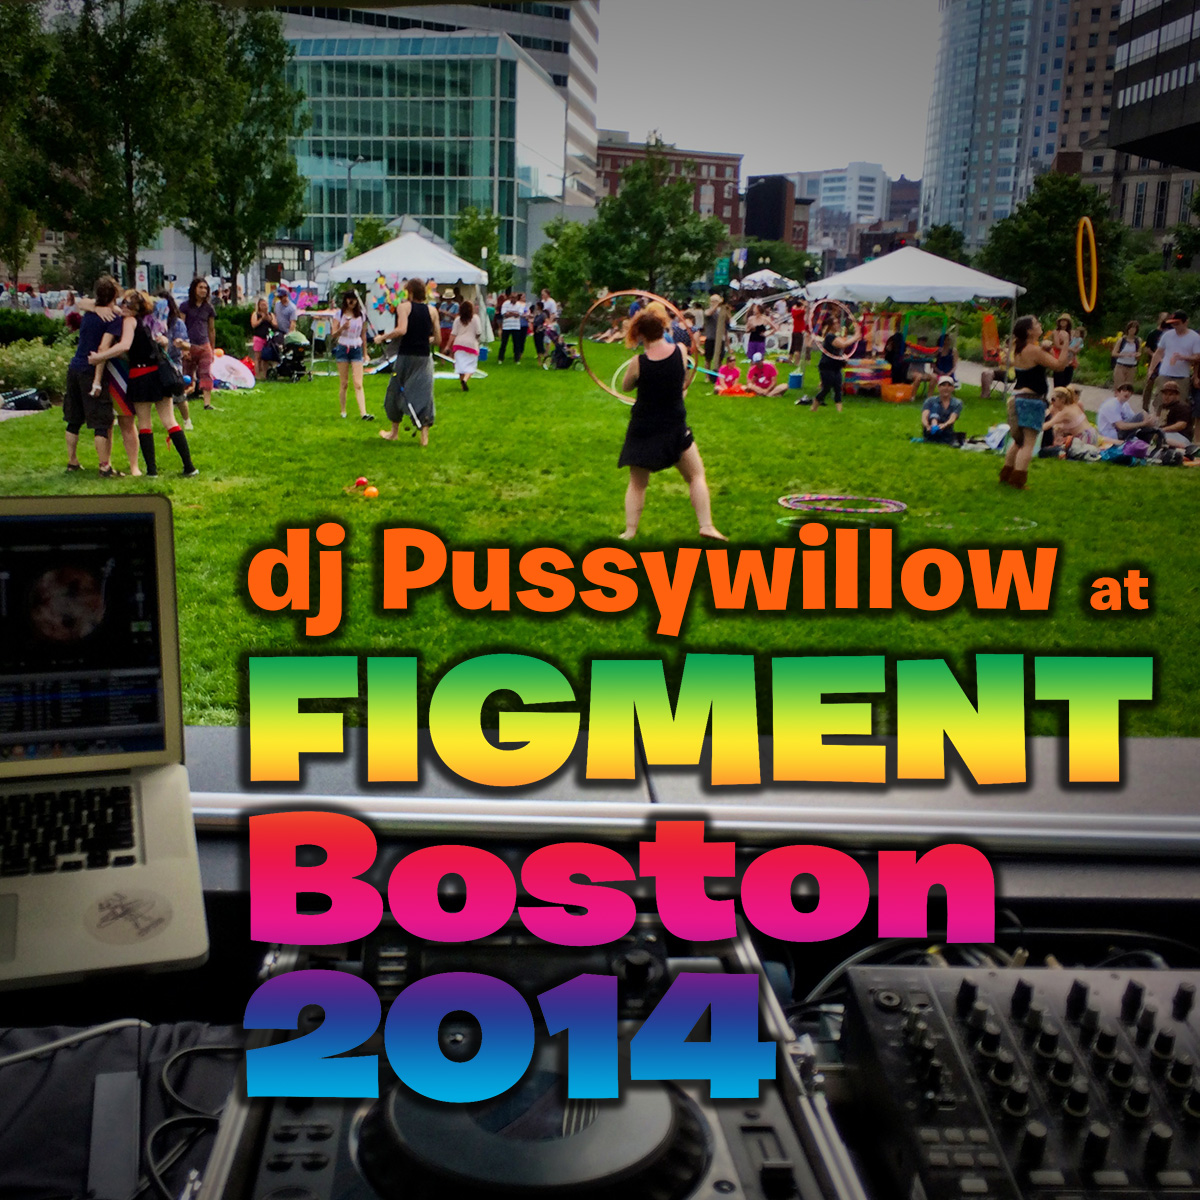 Pussywillow Live at Figment Boston - July 26, 2014